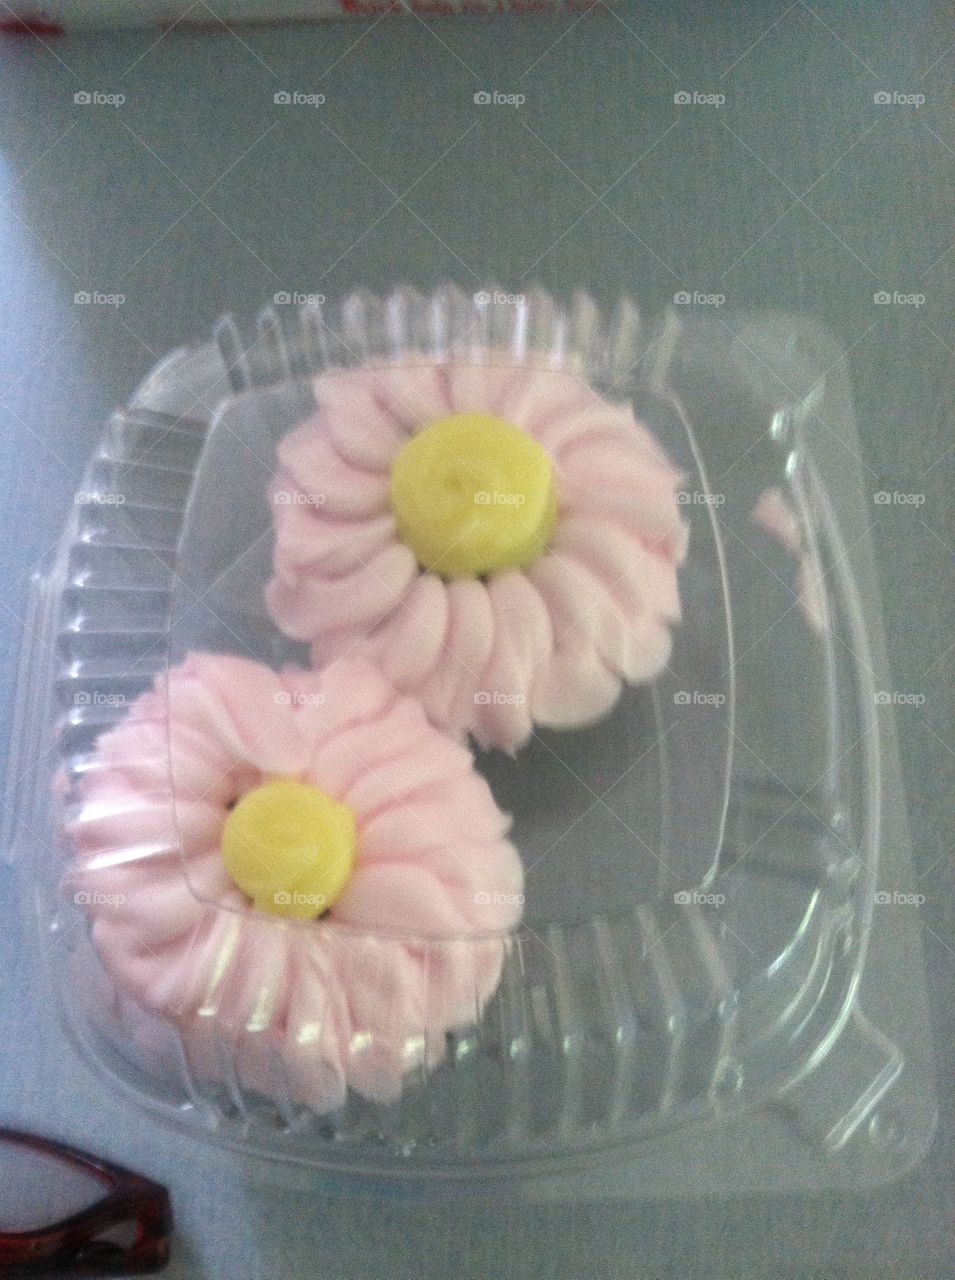 Flower cupcakes. Flower cupcakes for little girl's birthday party

